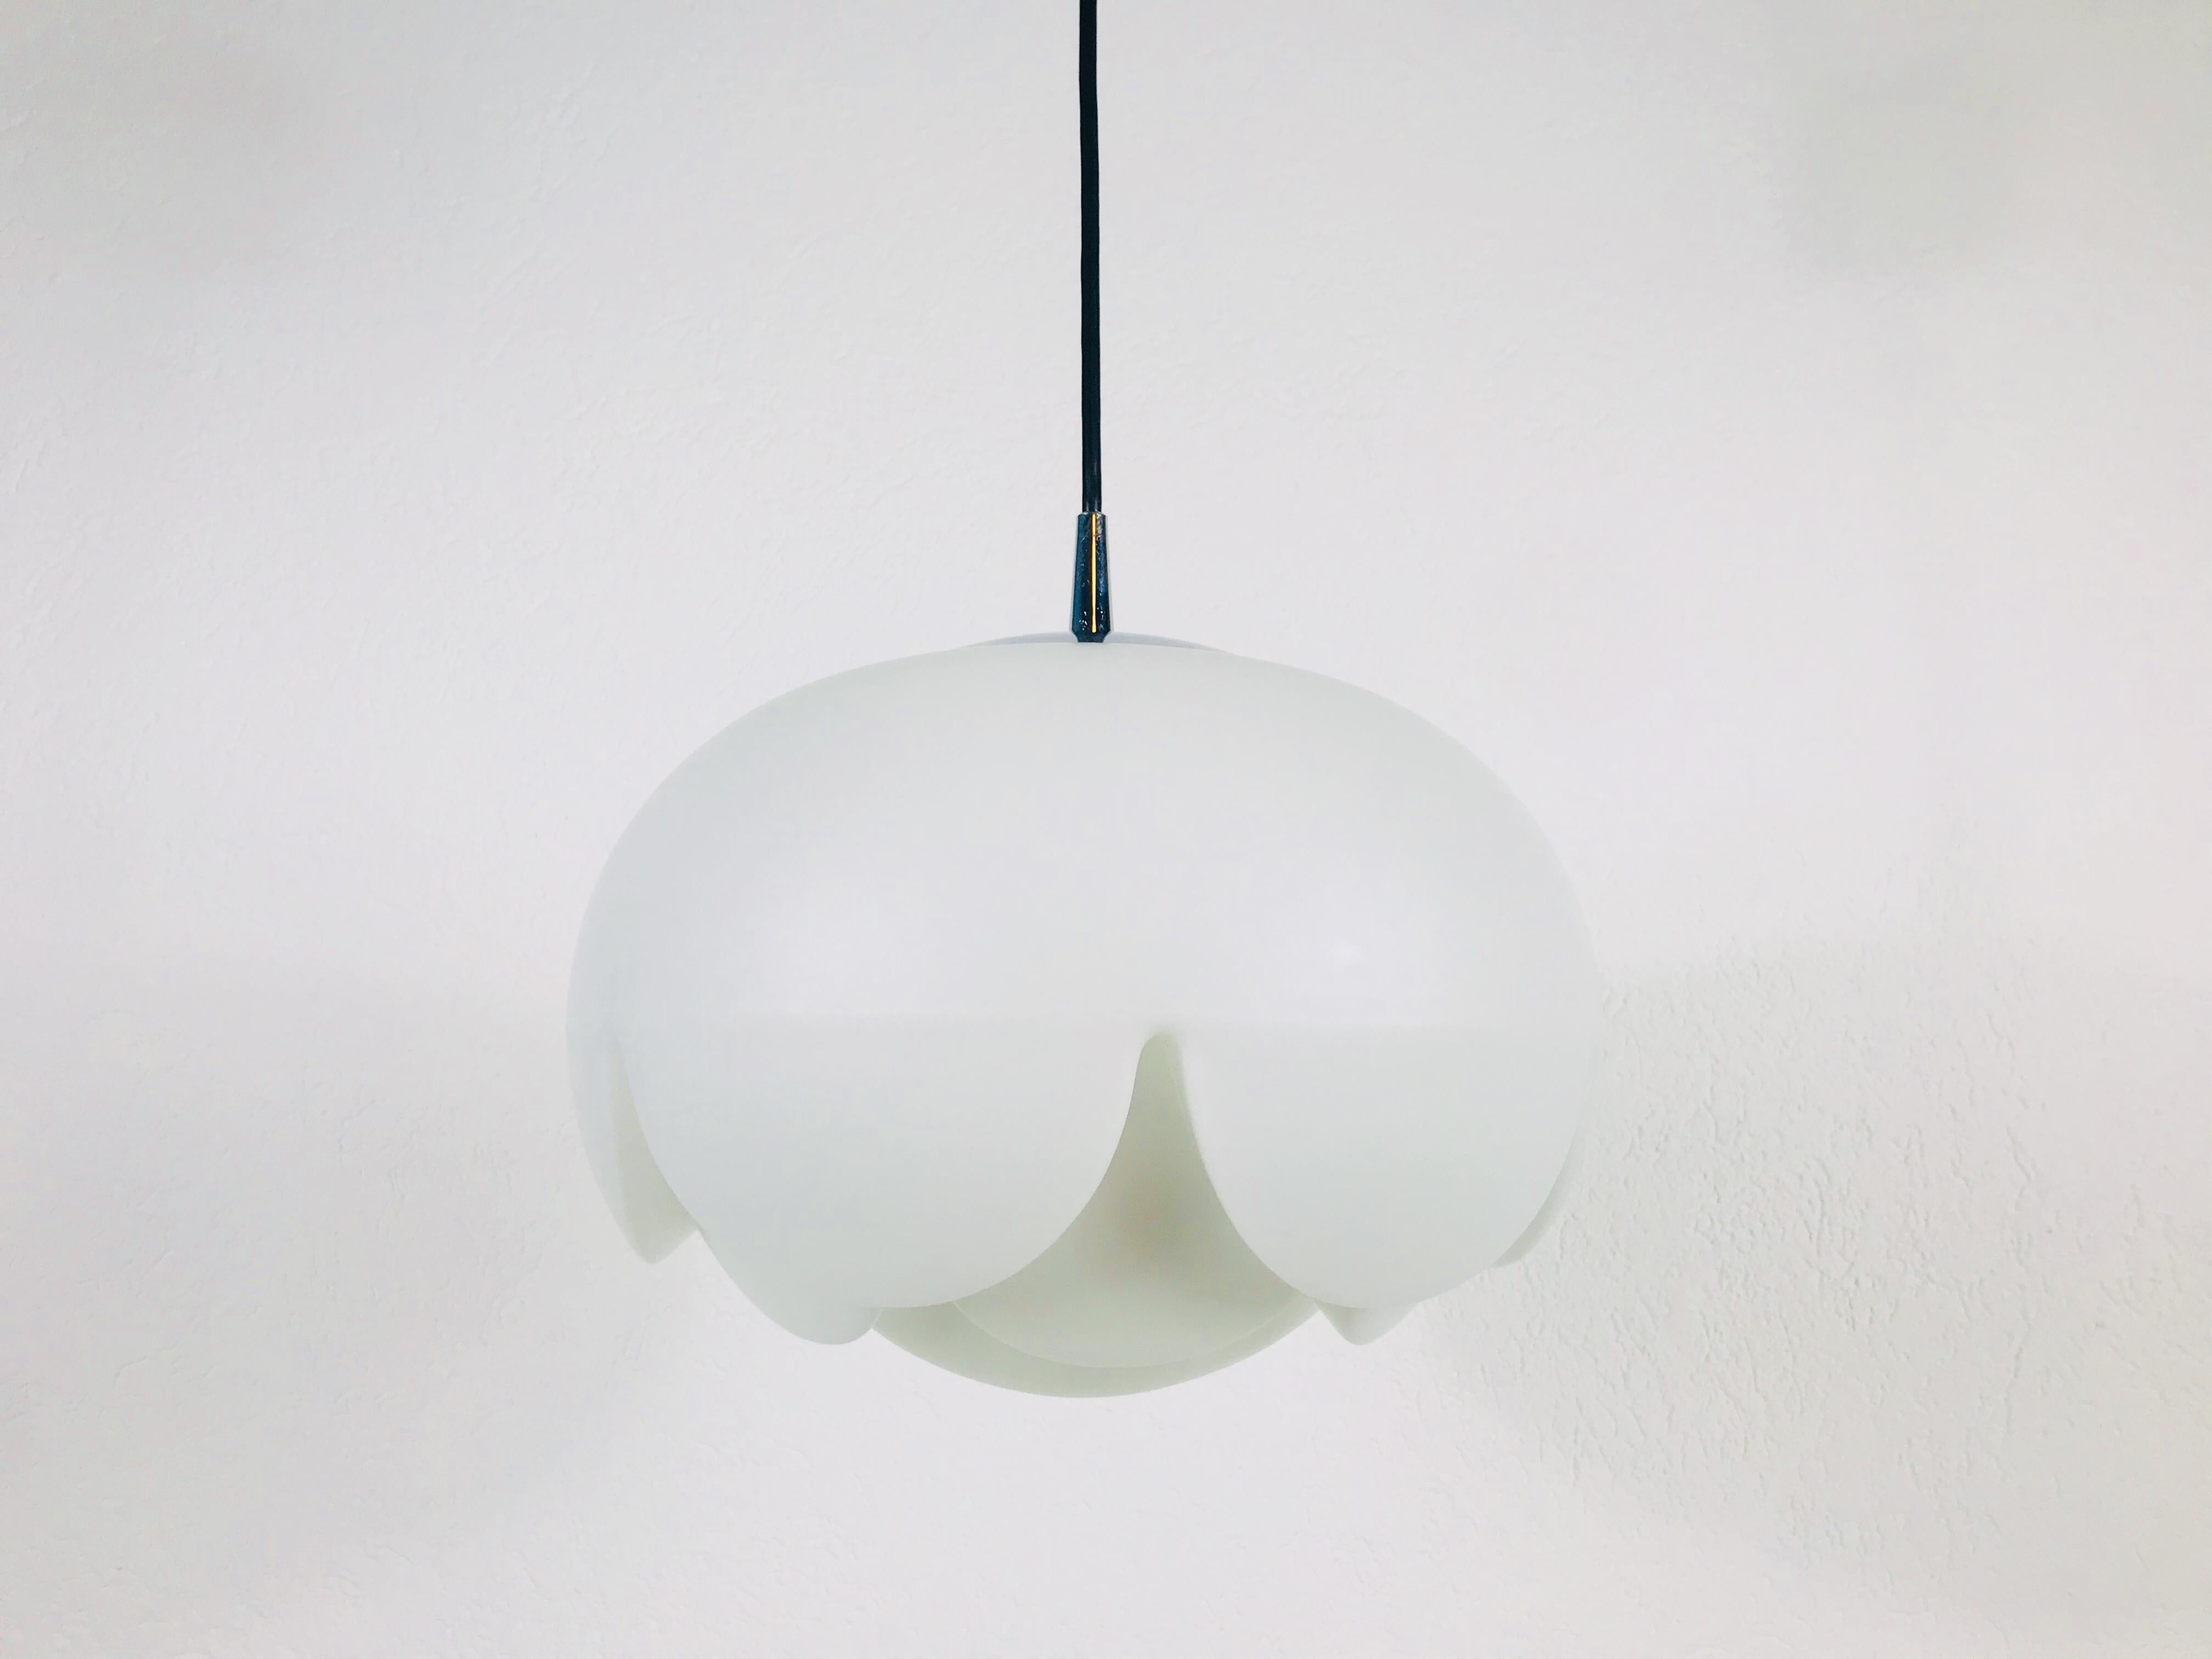 A Peill and Putzler hanging lamp made in Germany in the 1970s. It is fascinating with its glass ornaments. Textured opaline glass with aluminum top. The lamp has a beautiful artichoke shape.

The light requires one E27 light bulb.